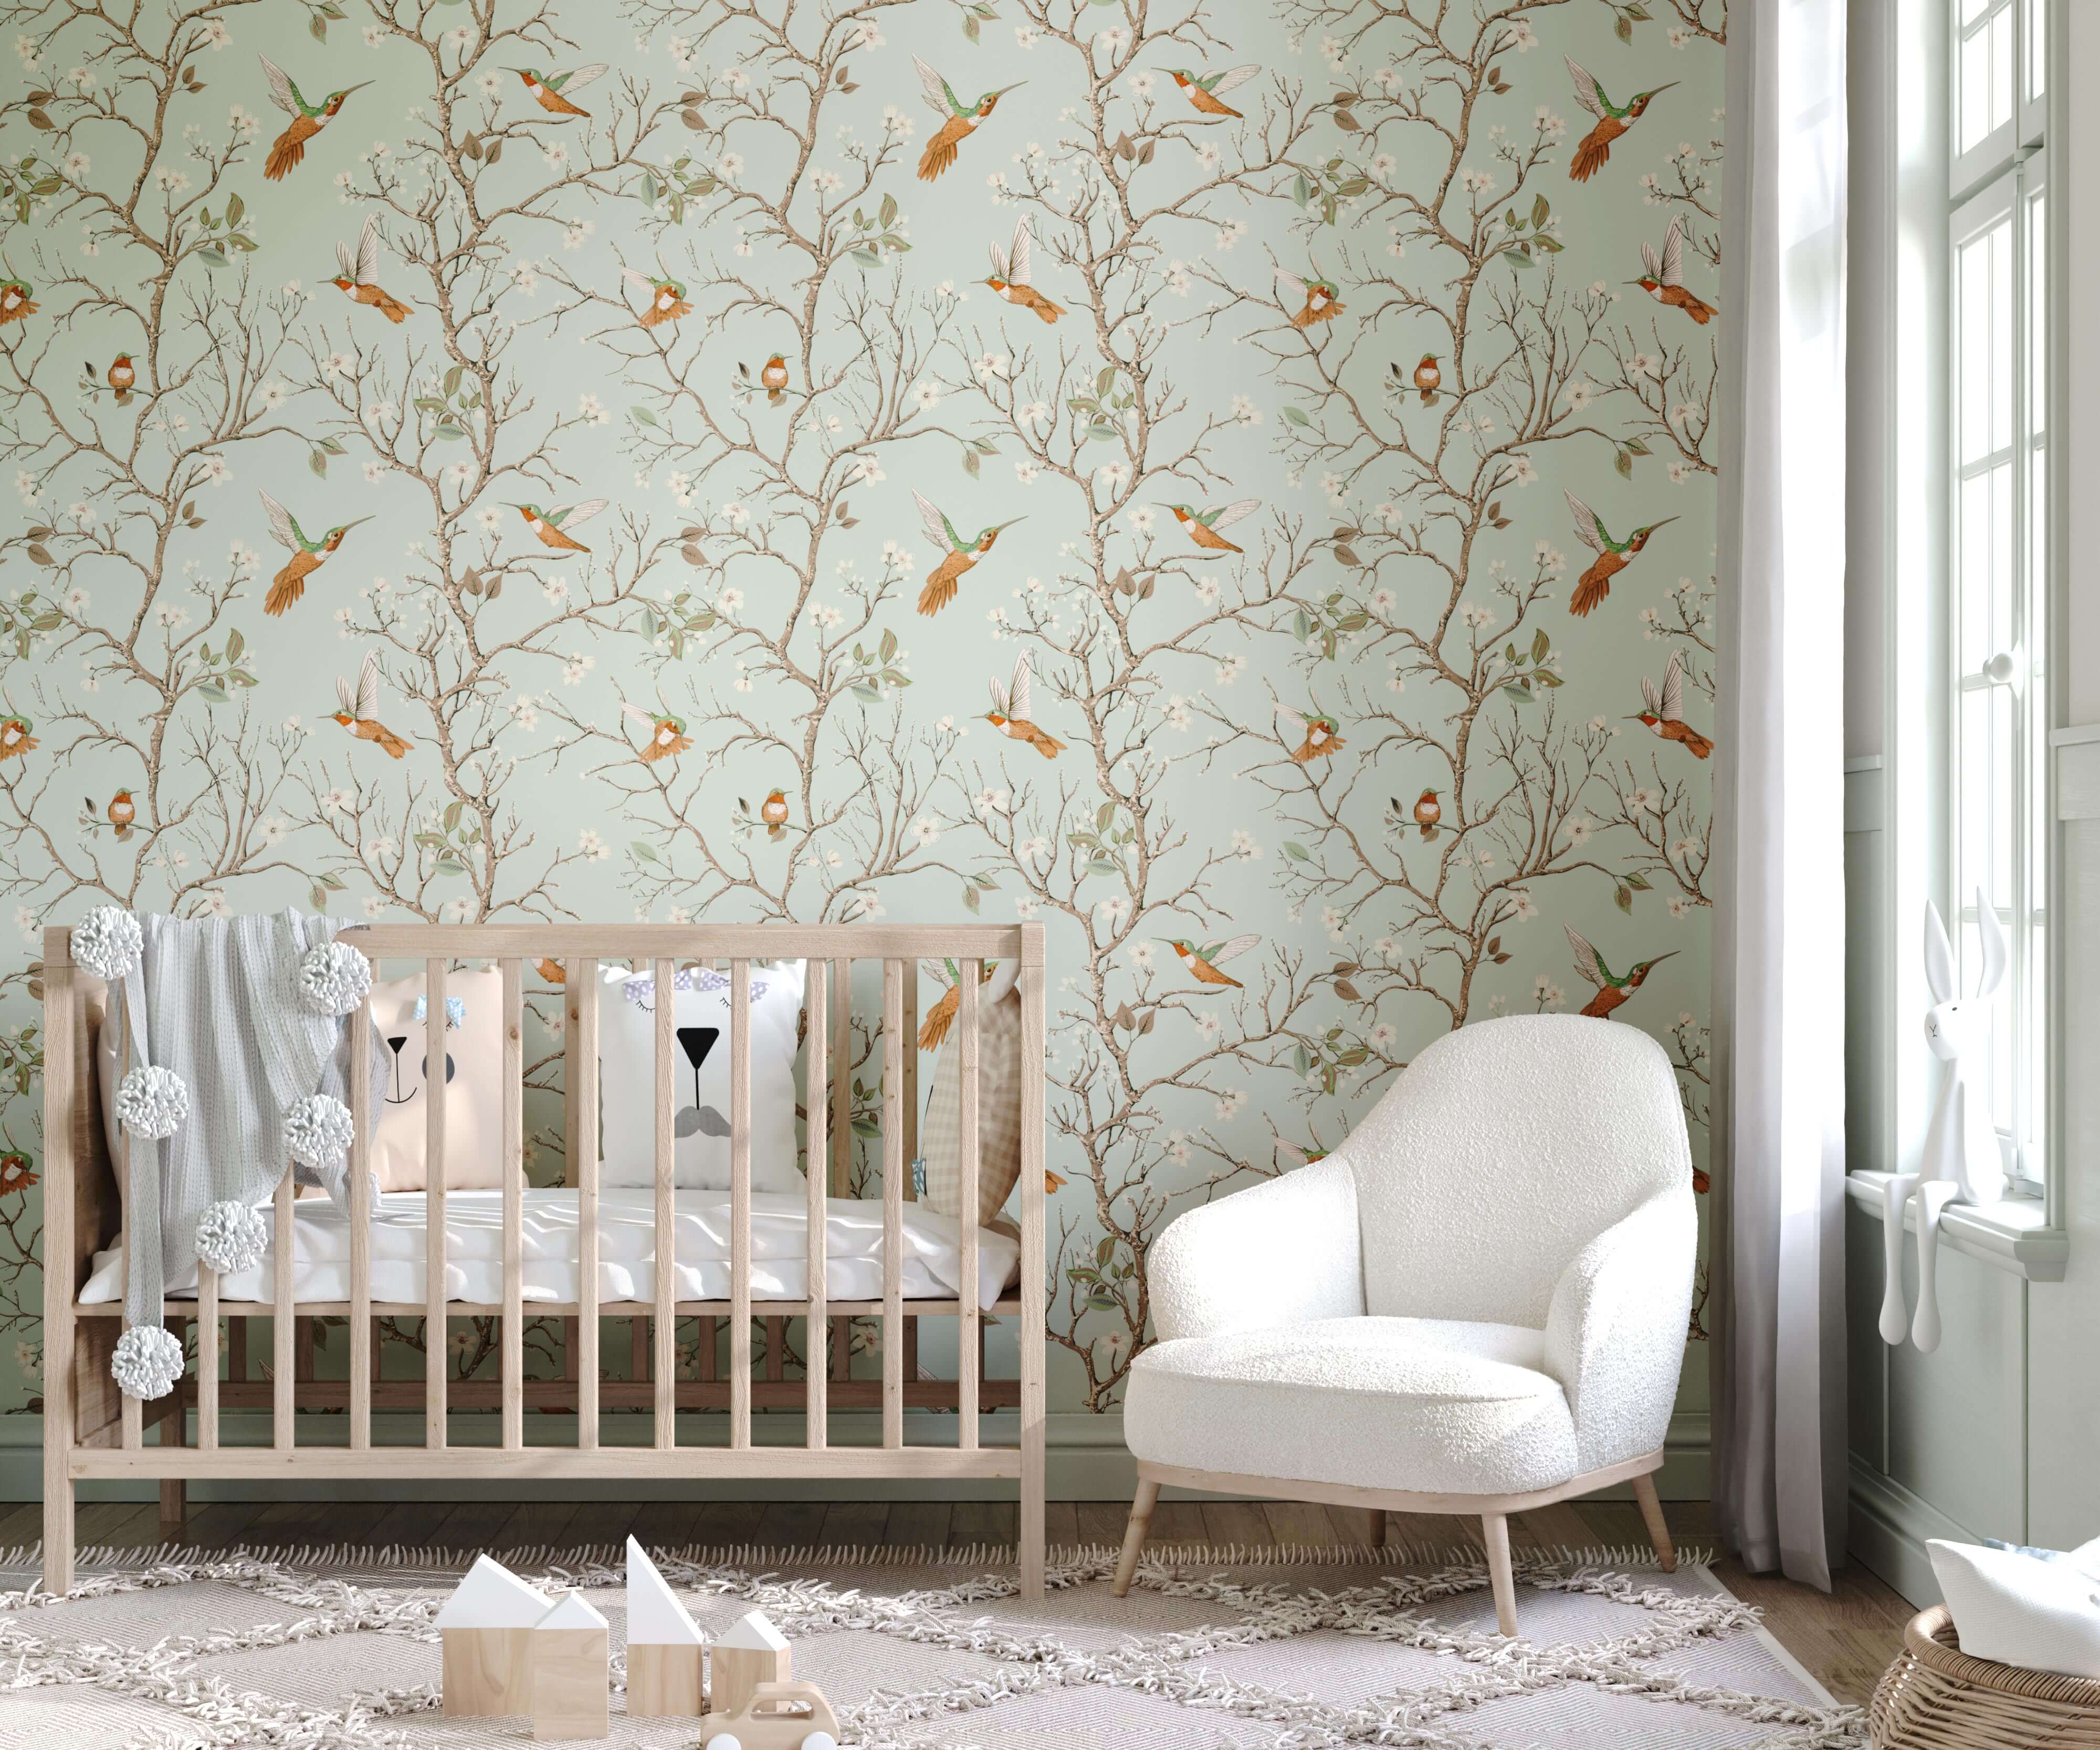 Forest Wallpaper Peel and Stick Nursery Wall Mural Kids Room decor  Scandi  Home